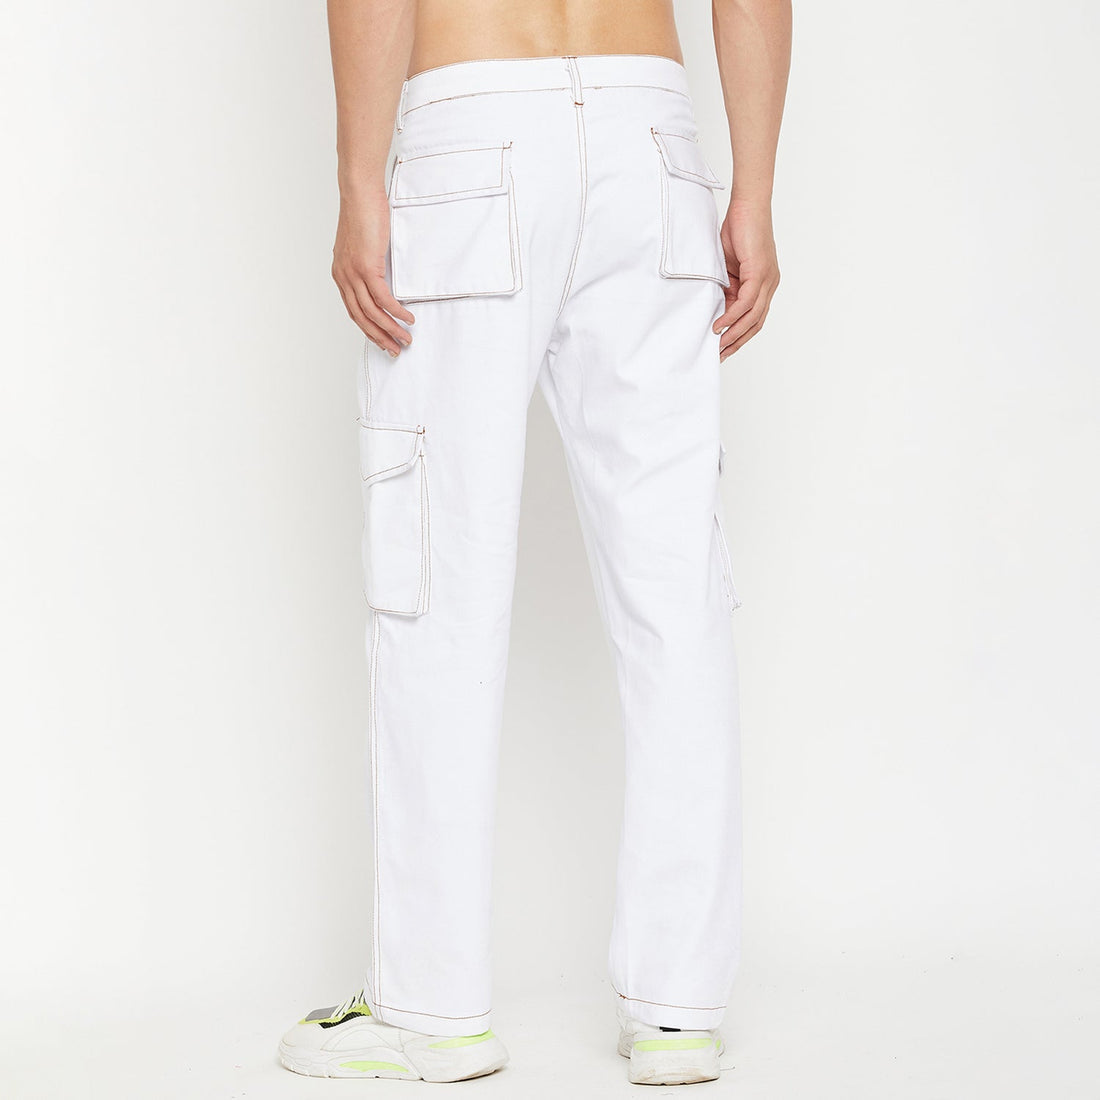 Baggy White Carpenter Cargo Pants - Comfortable and Stylish